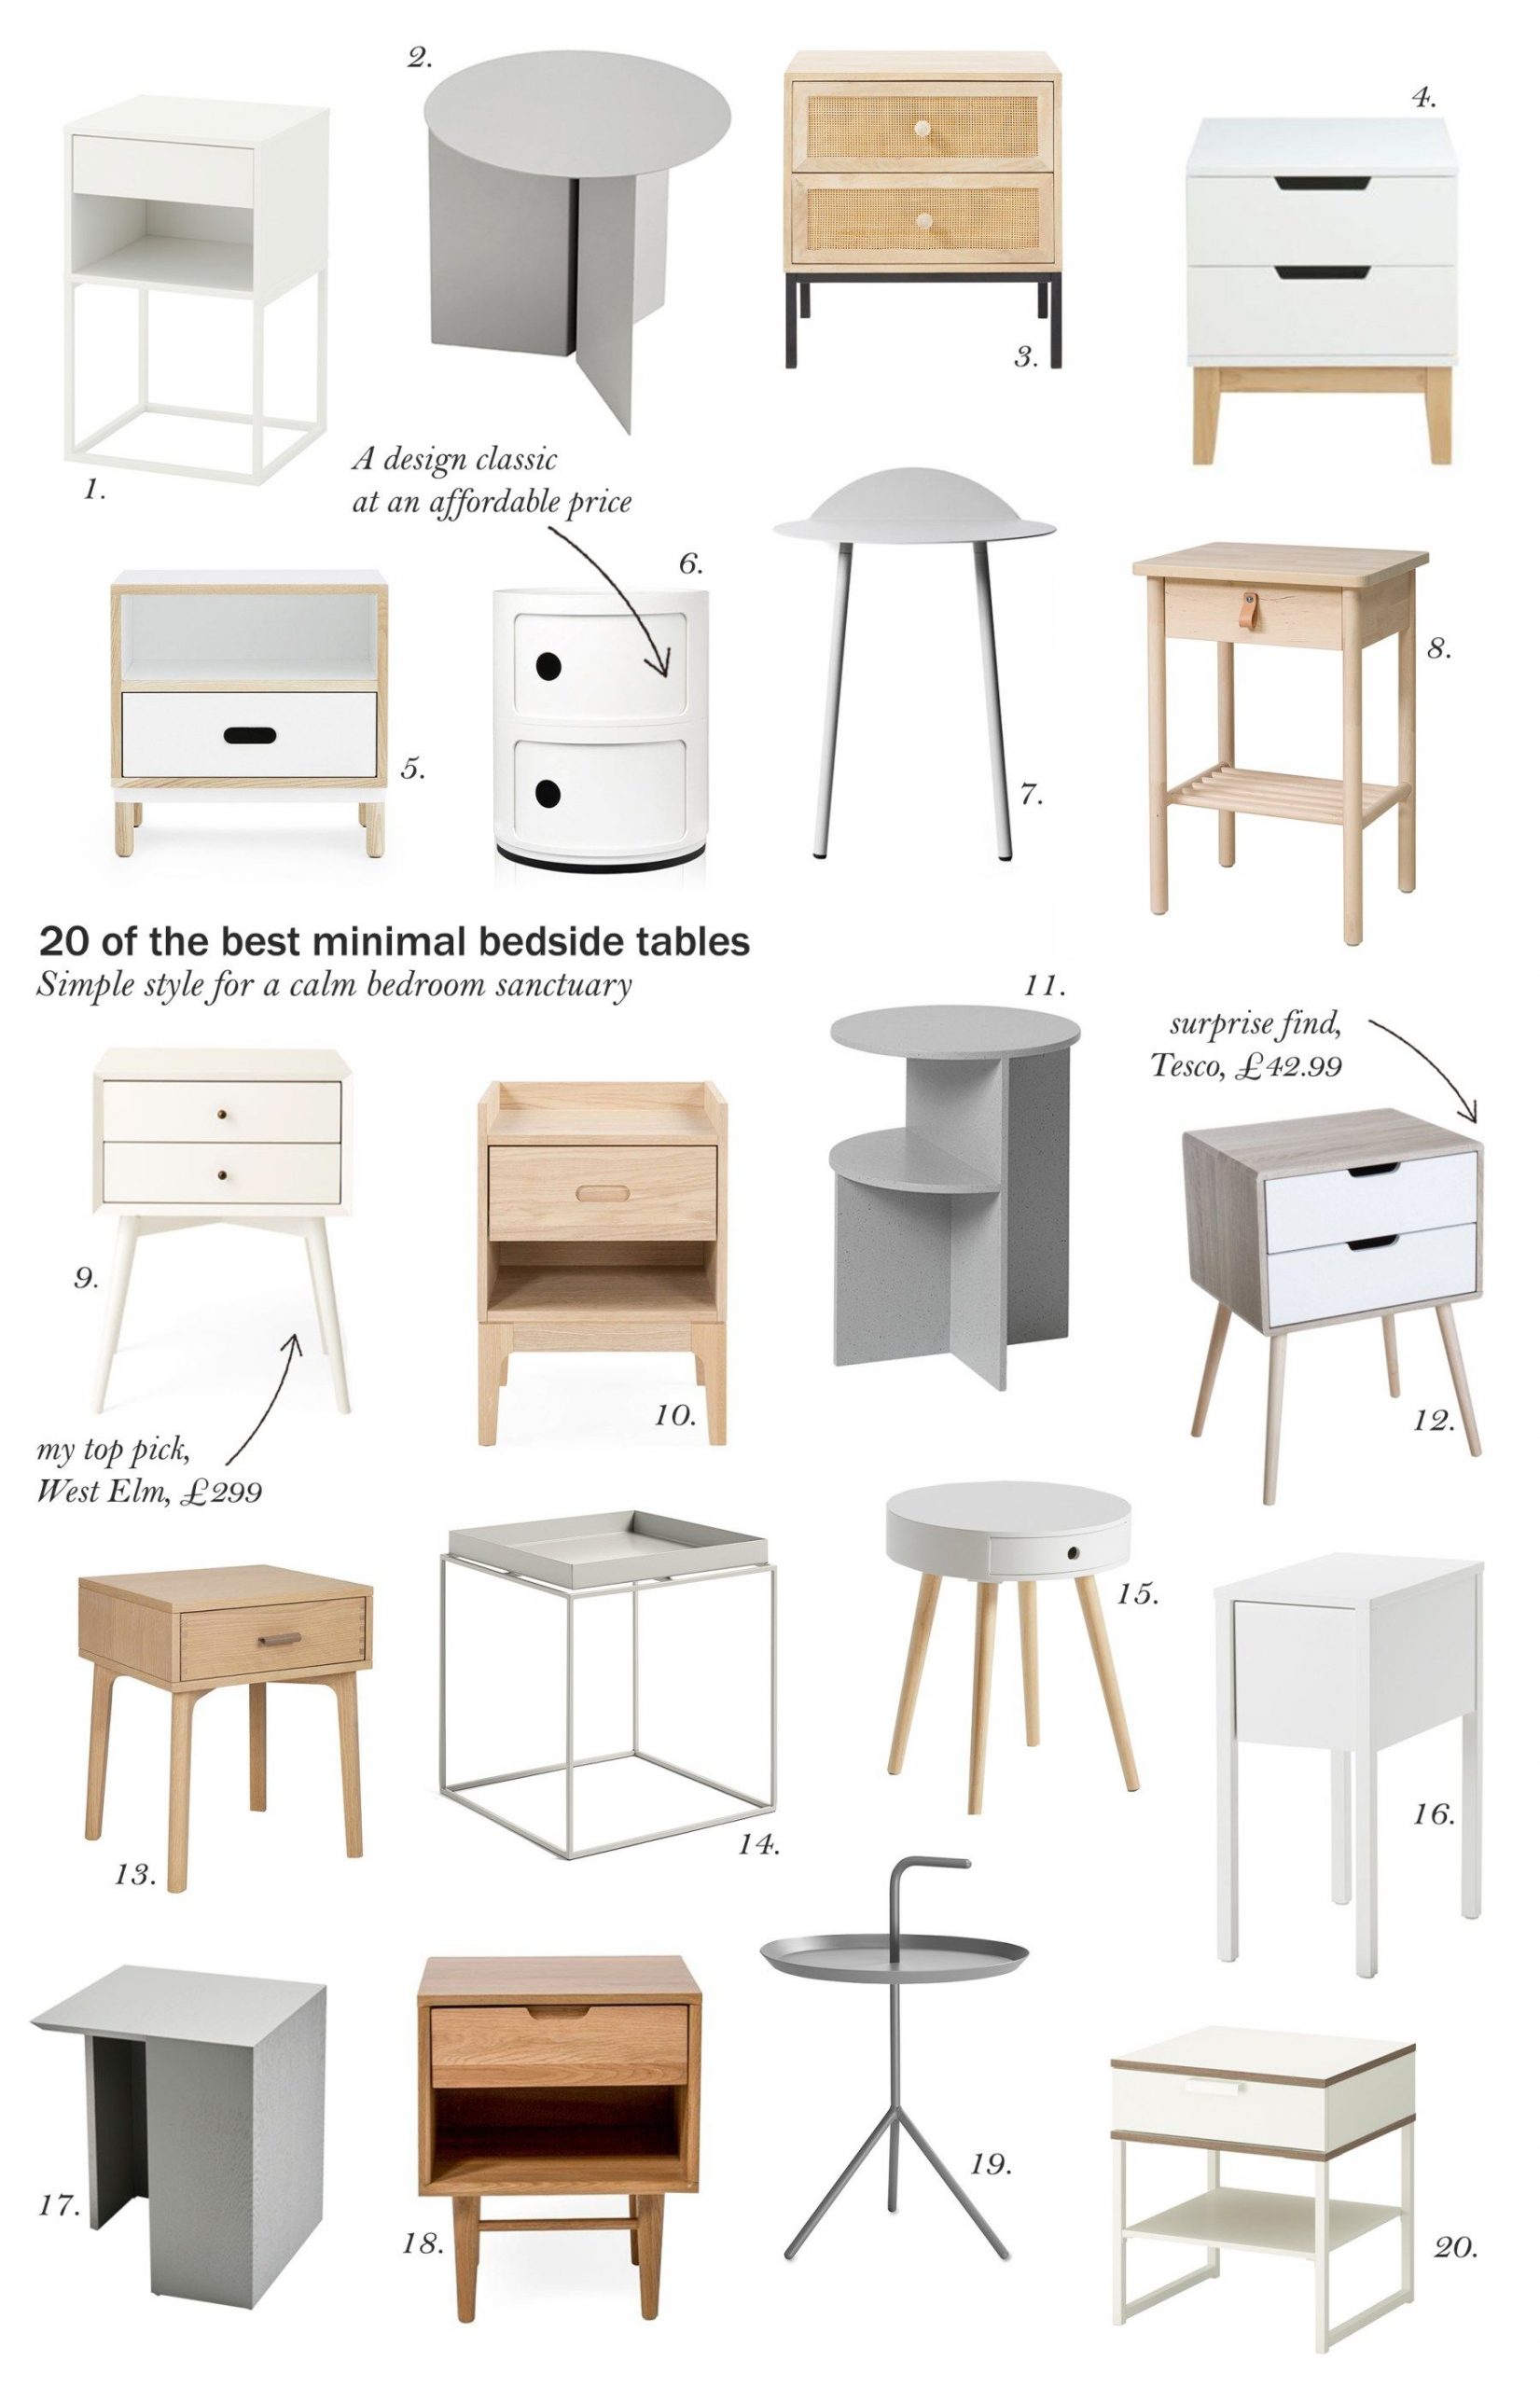 20 of the best minimal, Scandi-style bedside tables - cate st hill